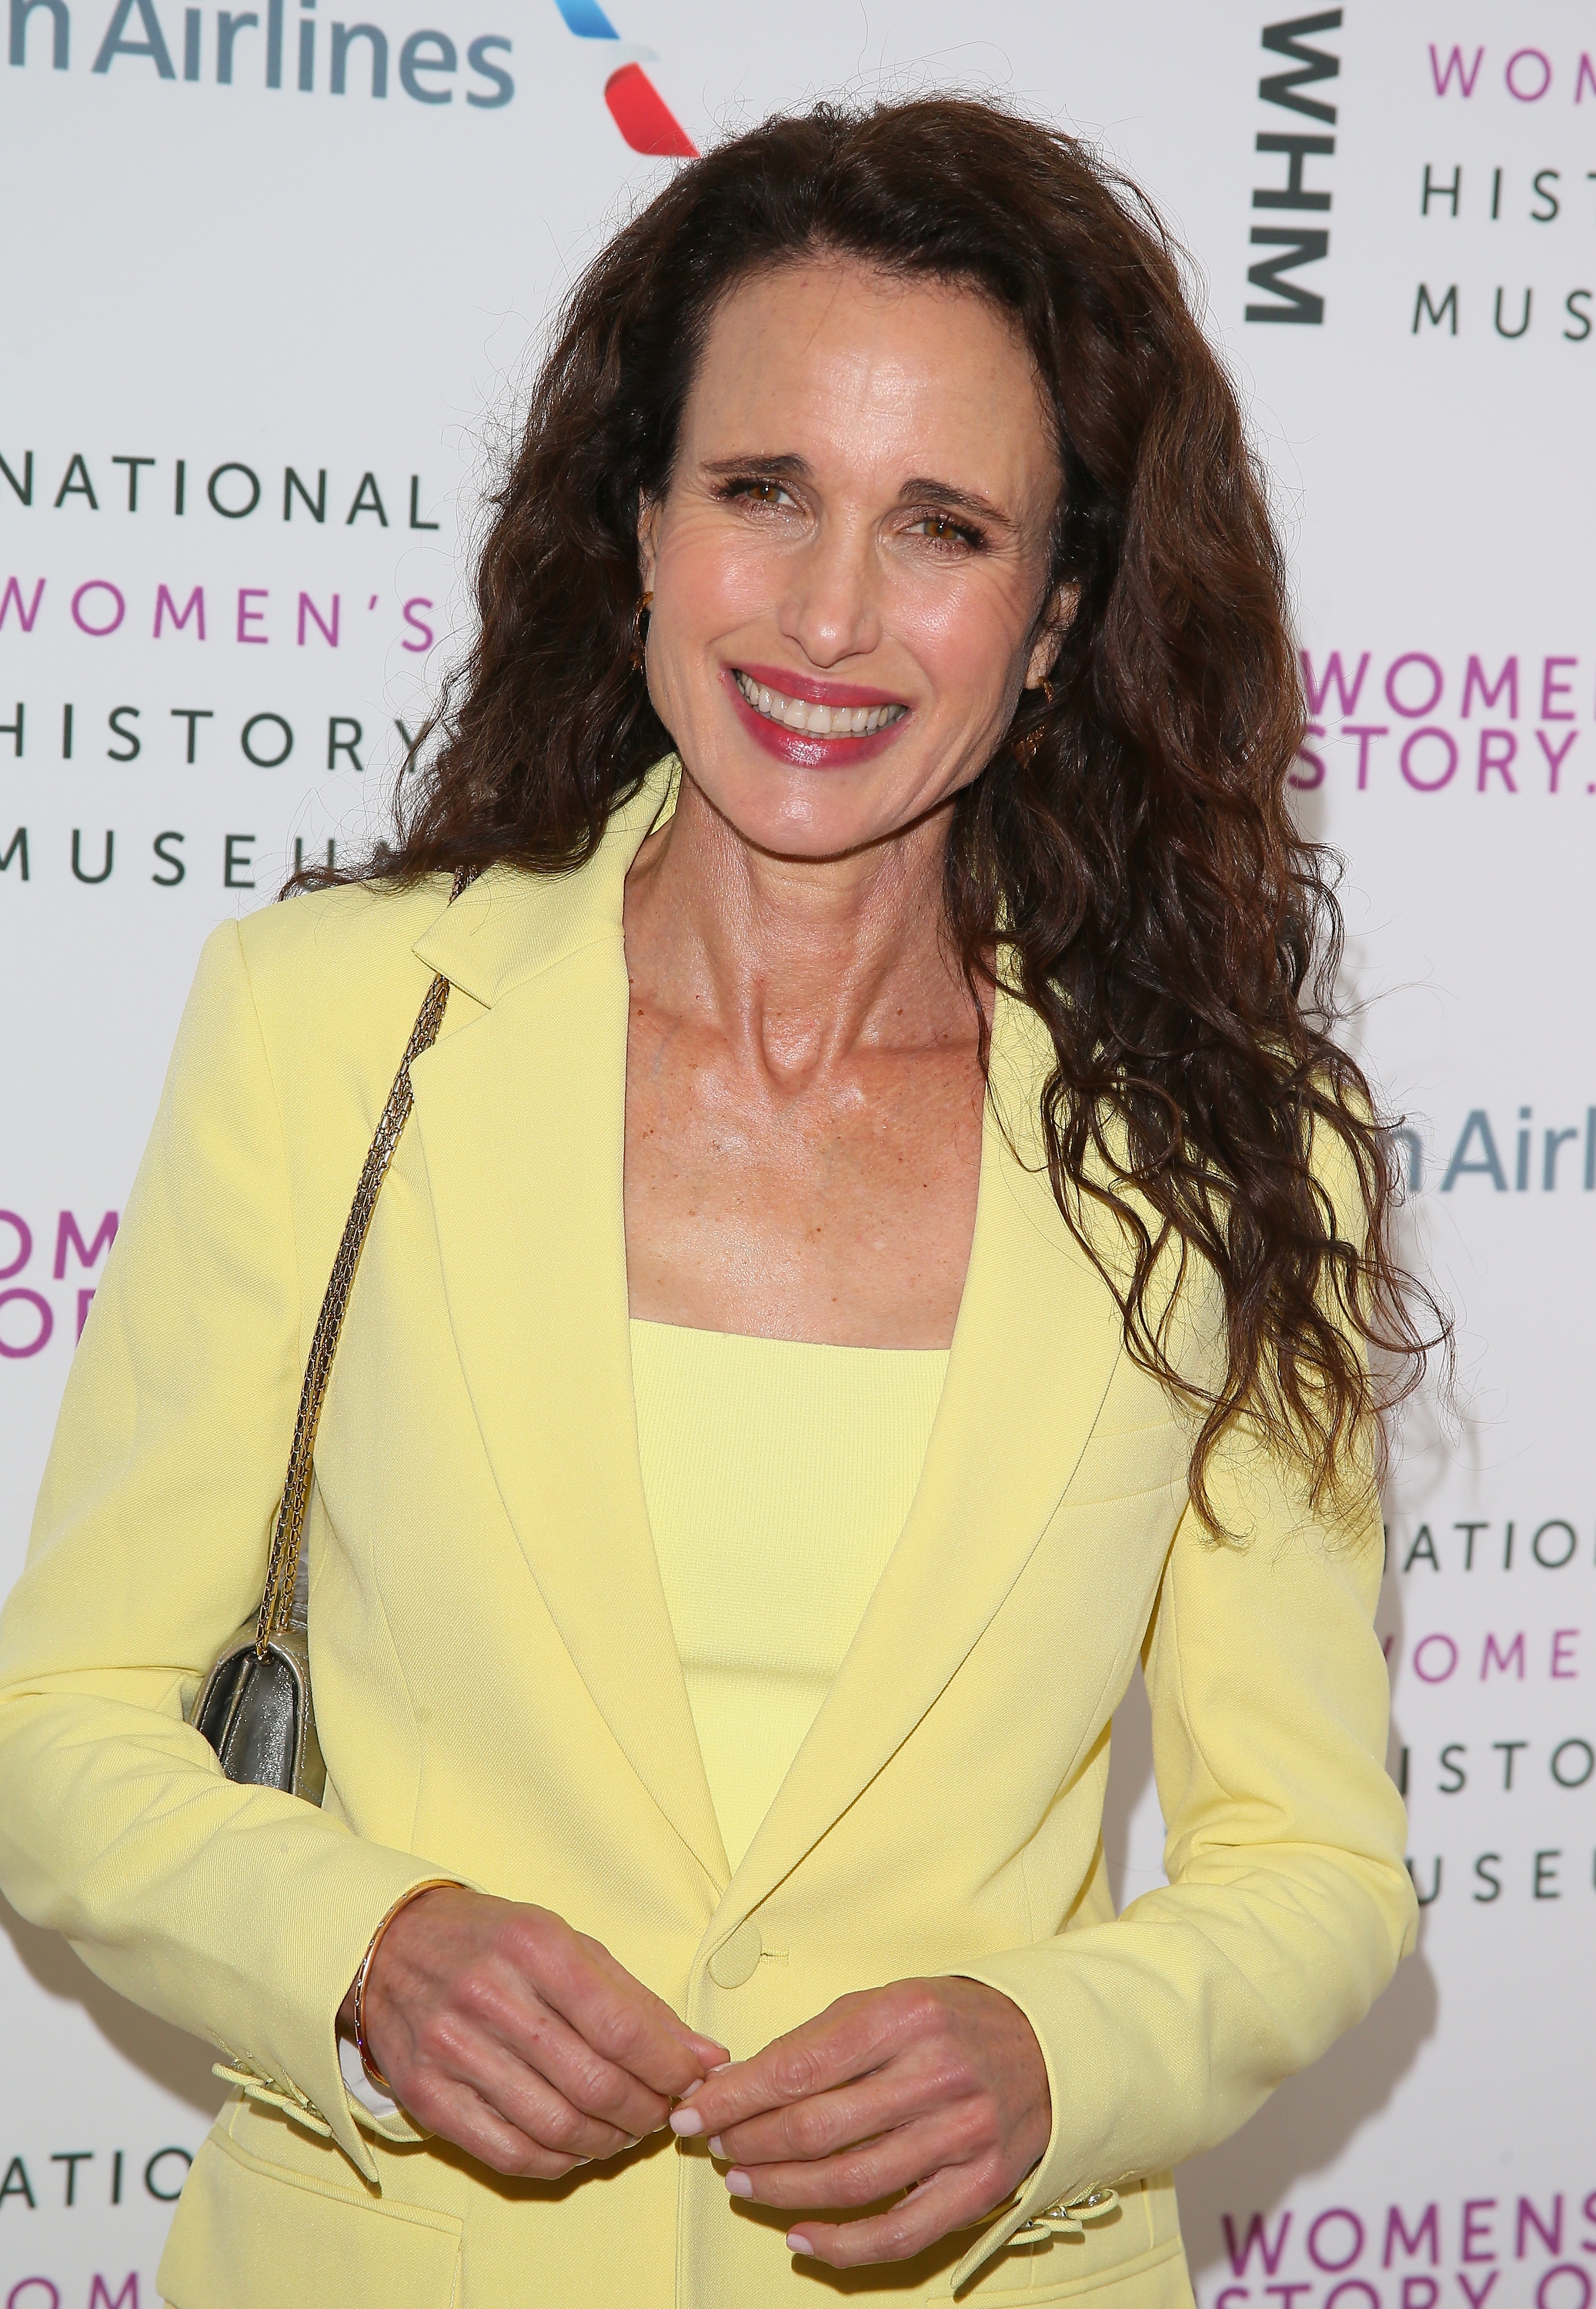 Andie MacDowell attends the National Women's History Museum's 8th Annual Women Making History Awardsat Skirball Cultural Center in Los Angeles, California, on March 8, 2020. | Source: Getty Images